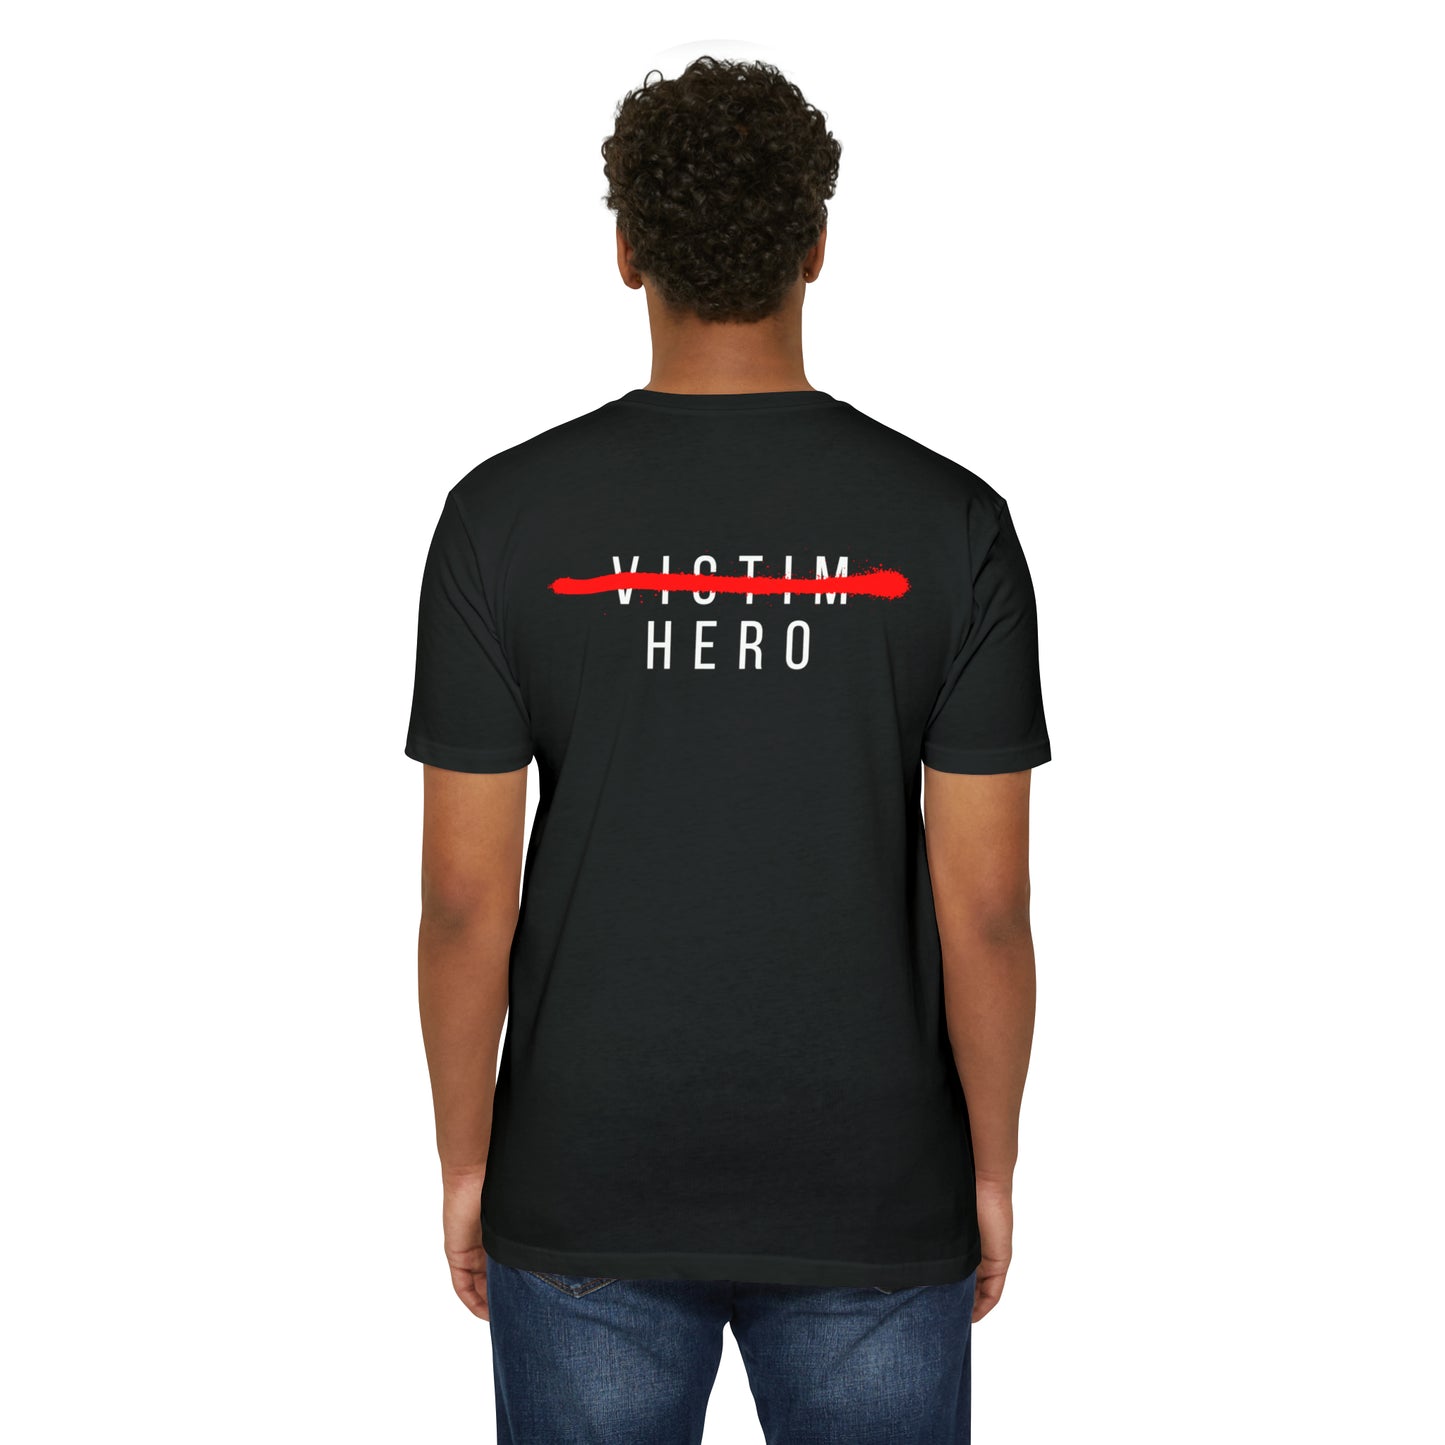 No One is Coming To Save You Unisex CVC Jersey T-shirt